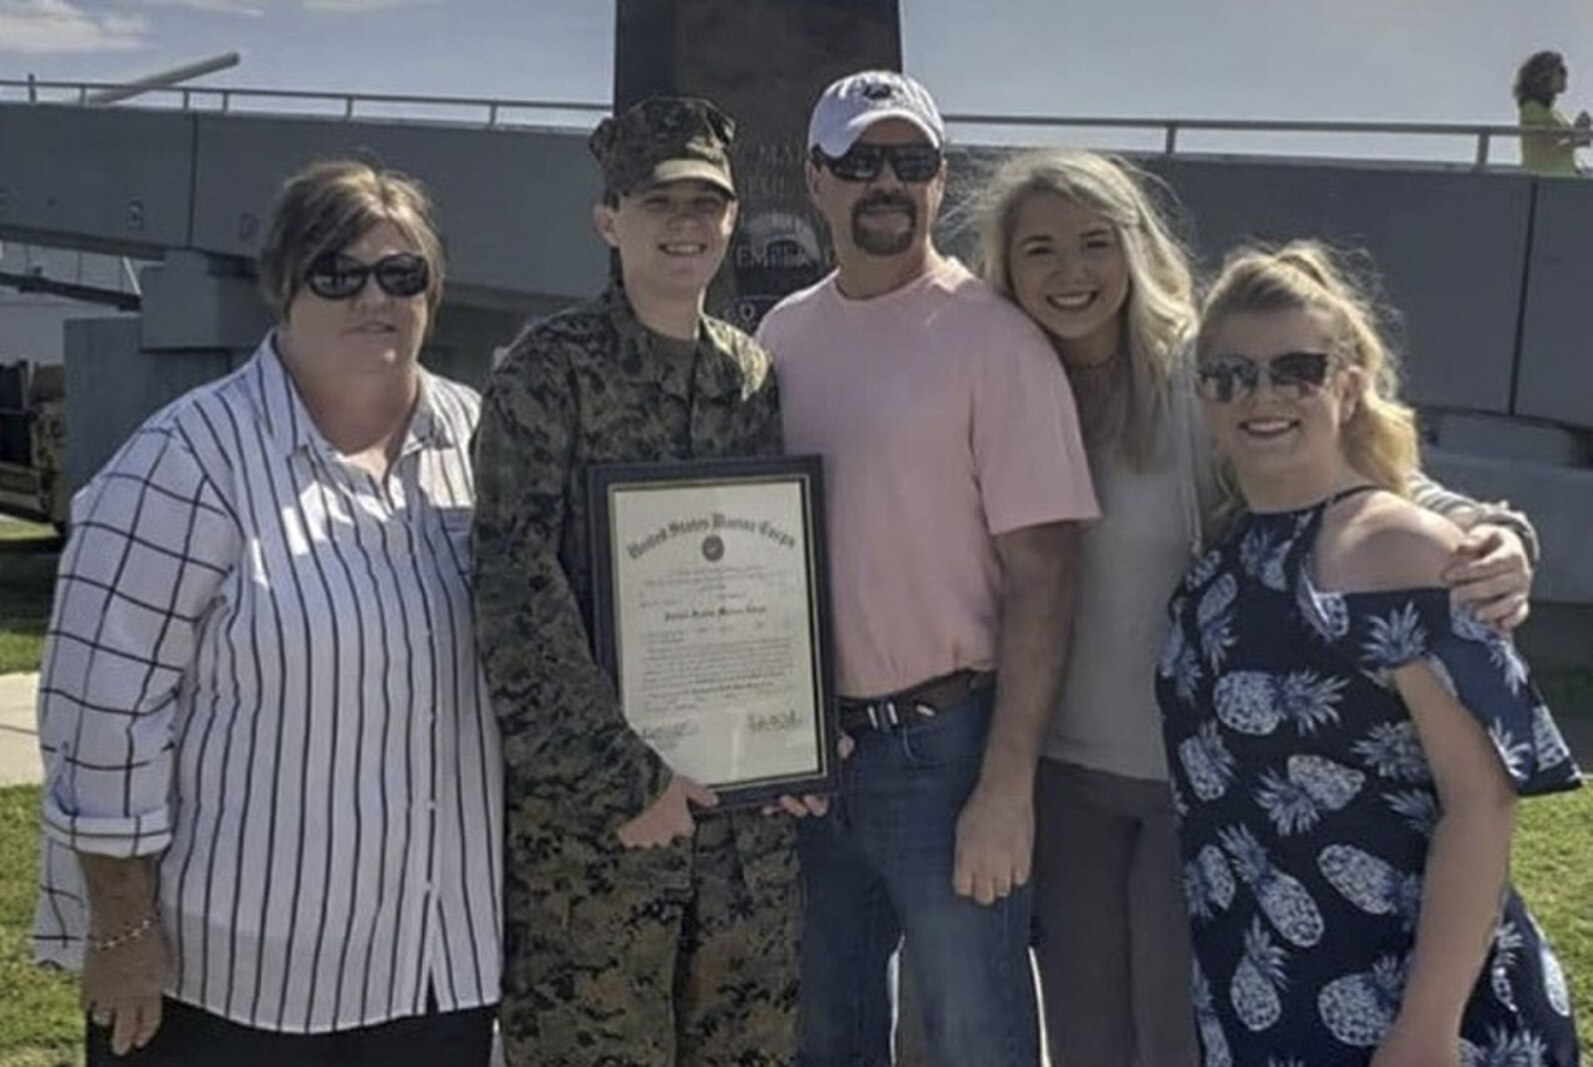 Staff Sgt. Kirk poses for a photo with her family after her promotion to Staff Sgt. aboard the USS Alabama in Mobile, AL. The USS Alabama saw service across the globe during World War II and has been preserved as a museum ship in Mobile Bay, AL since 1964.